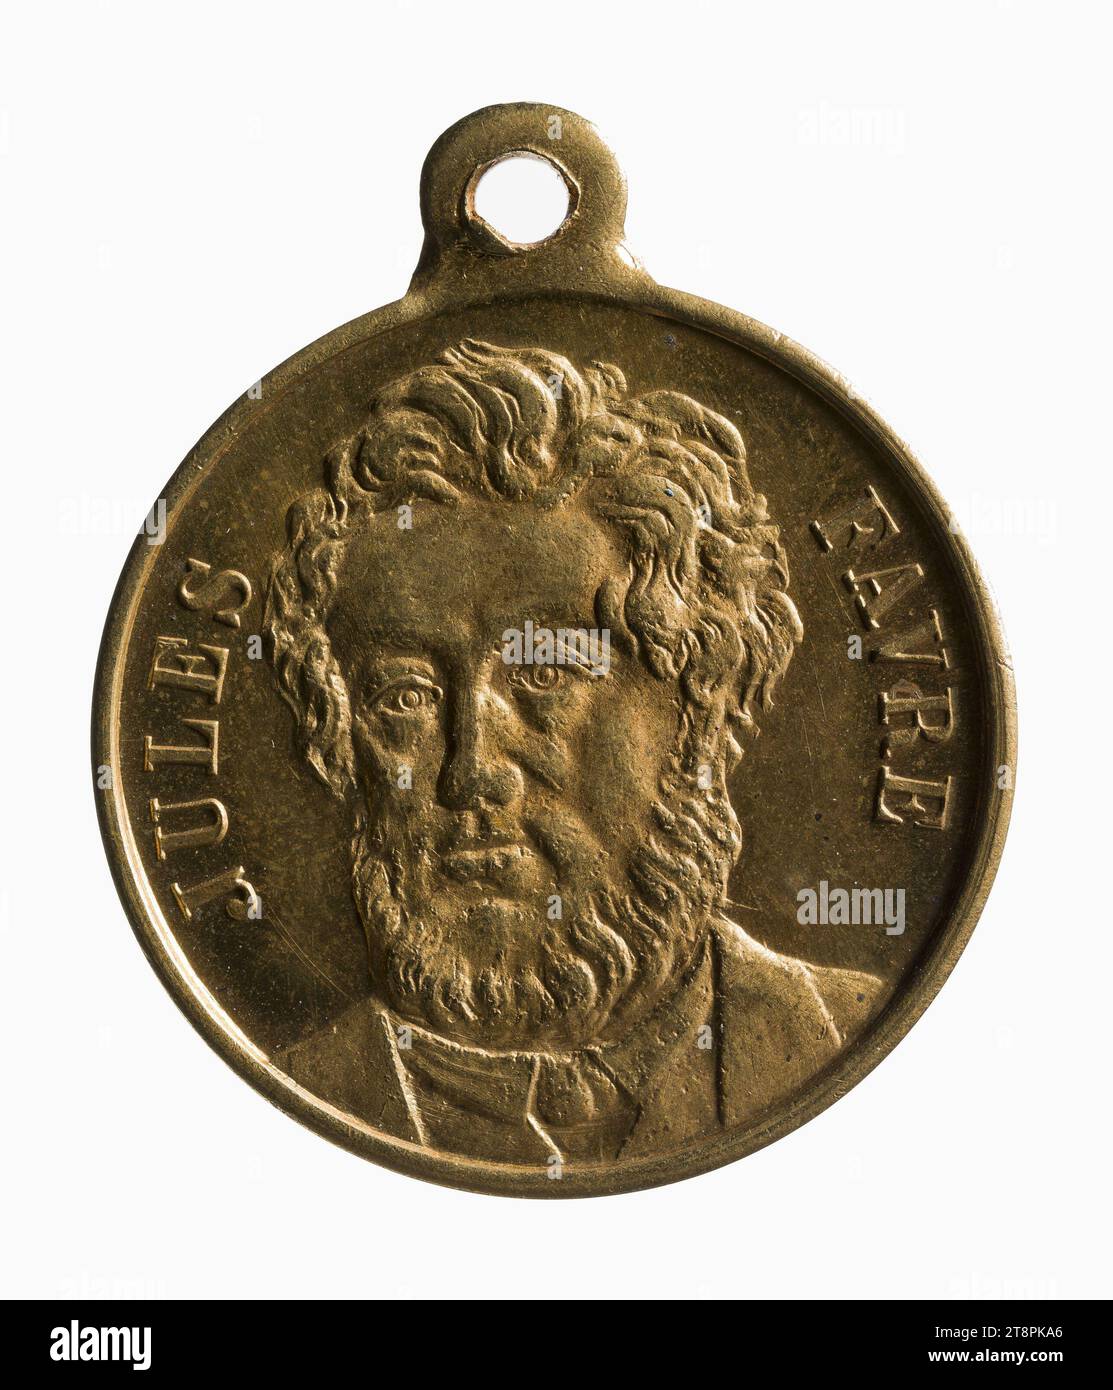 Jules Favre and the members of the government of the national defense, 19th century, Numismatic, Medal, Copper, Gilt = gilding, Dimensions - Work: Diameter: 2.4 cm, Weight (type dimension): 4.89 g Stock Photo